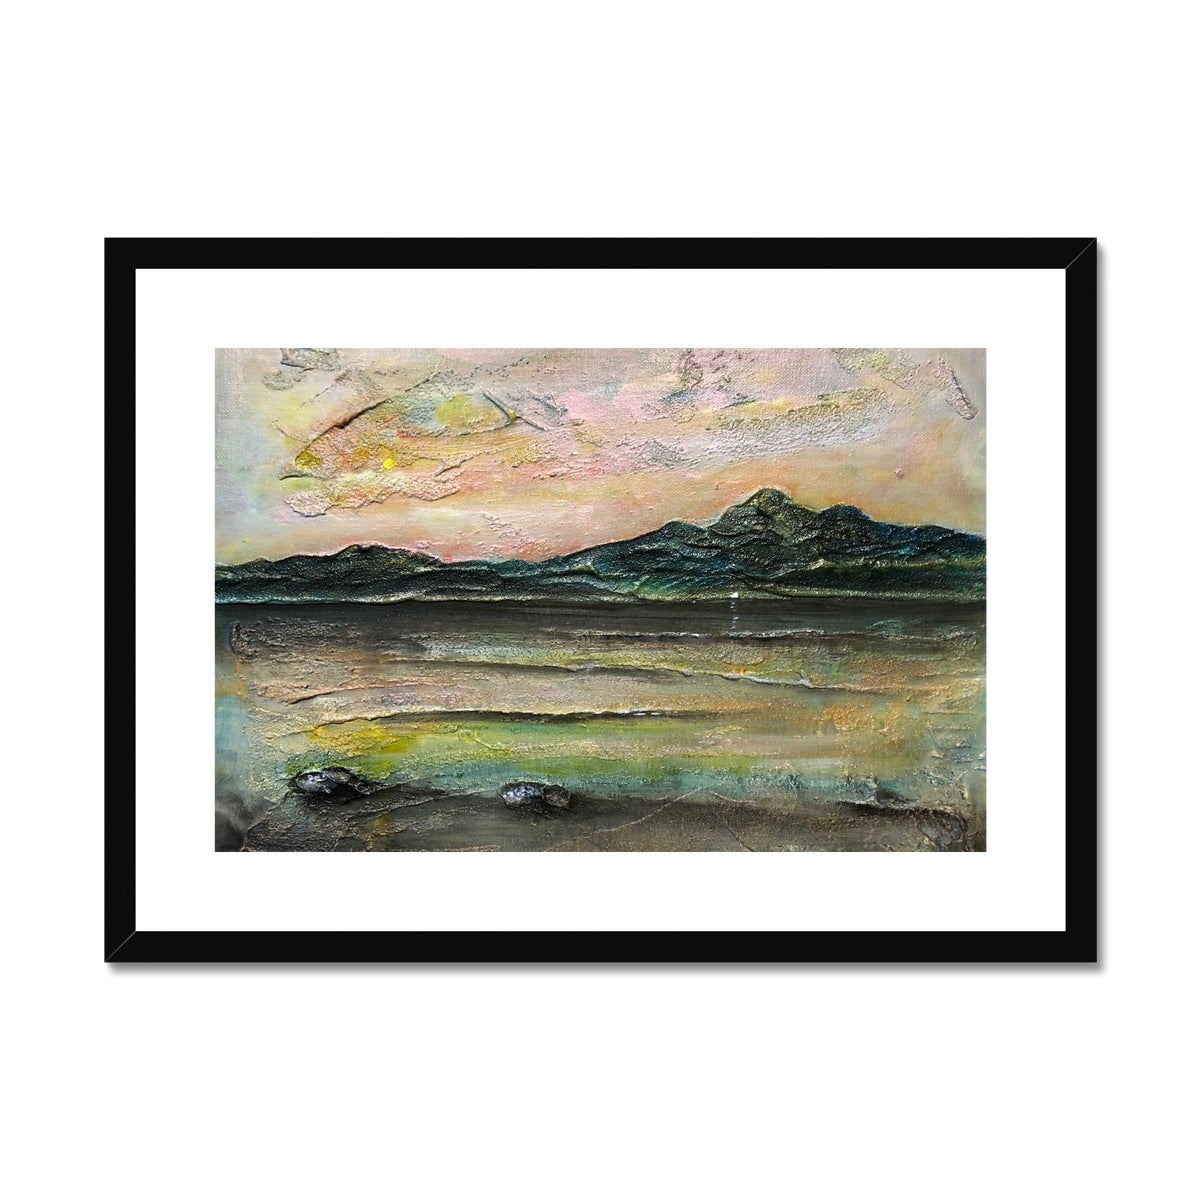 An Ethereal Loch Na Dal Skye Painting | Framed & Mounted Prints From Scotland-Framed & Mounted Prints-Scottish Lochs & Mountains Art Gallery-A2 Landscape-Black Frame-Paintings, Prints, Homeware, Art Gifts From Scotland By Scottish Artist Kevin Hunter